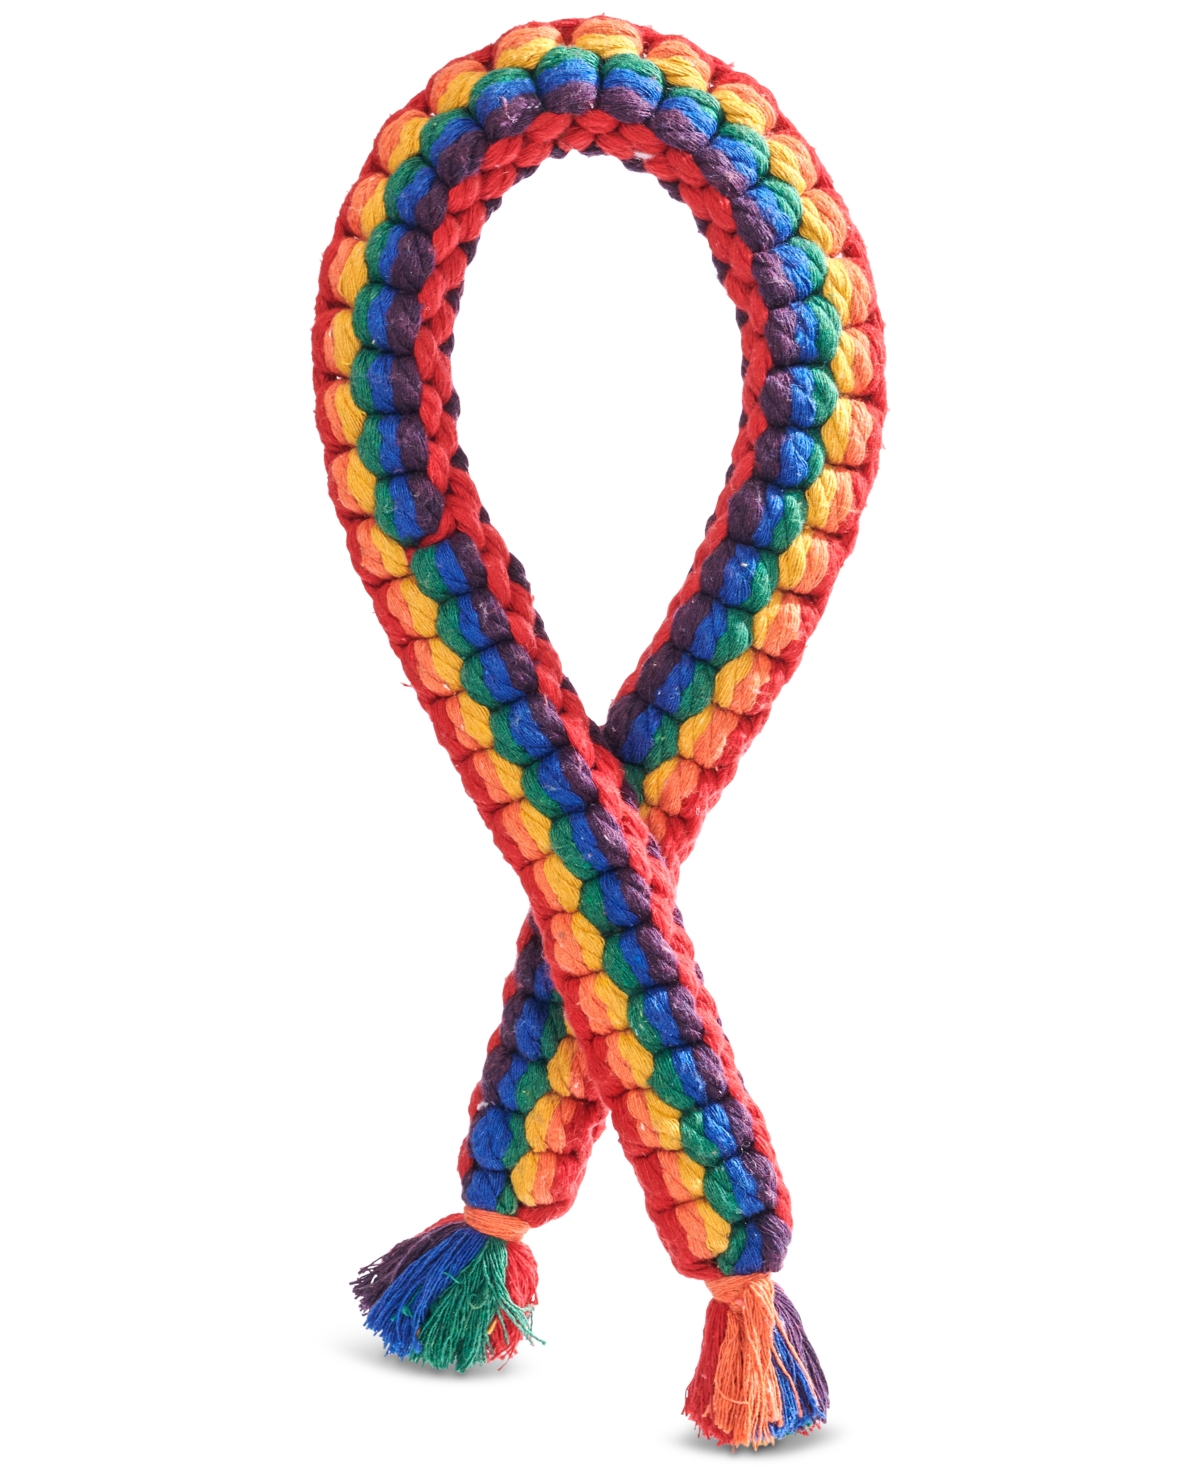 Rainbow Rope Dog Toy - Other